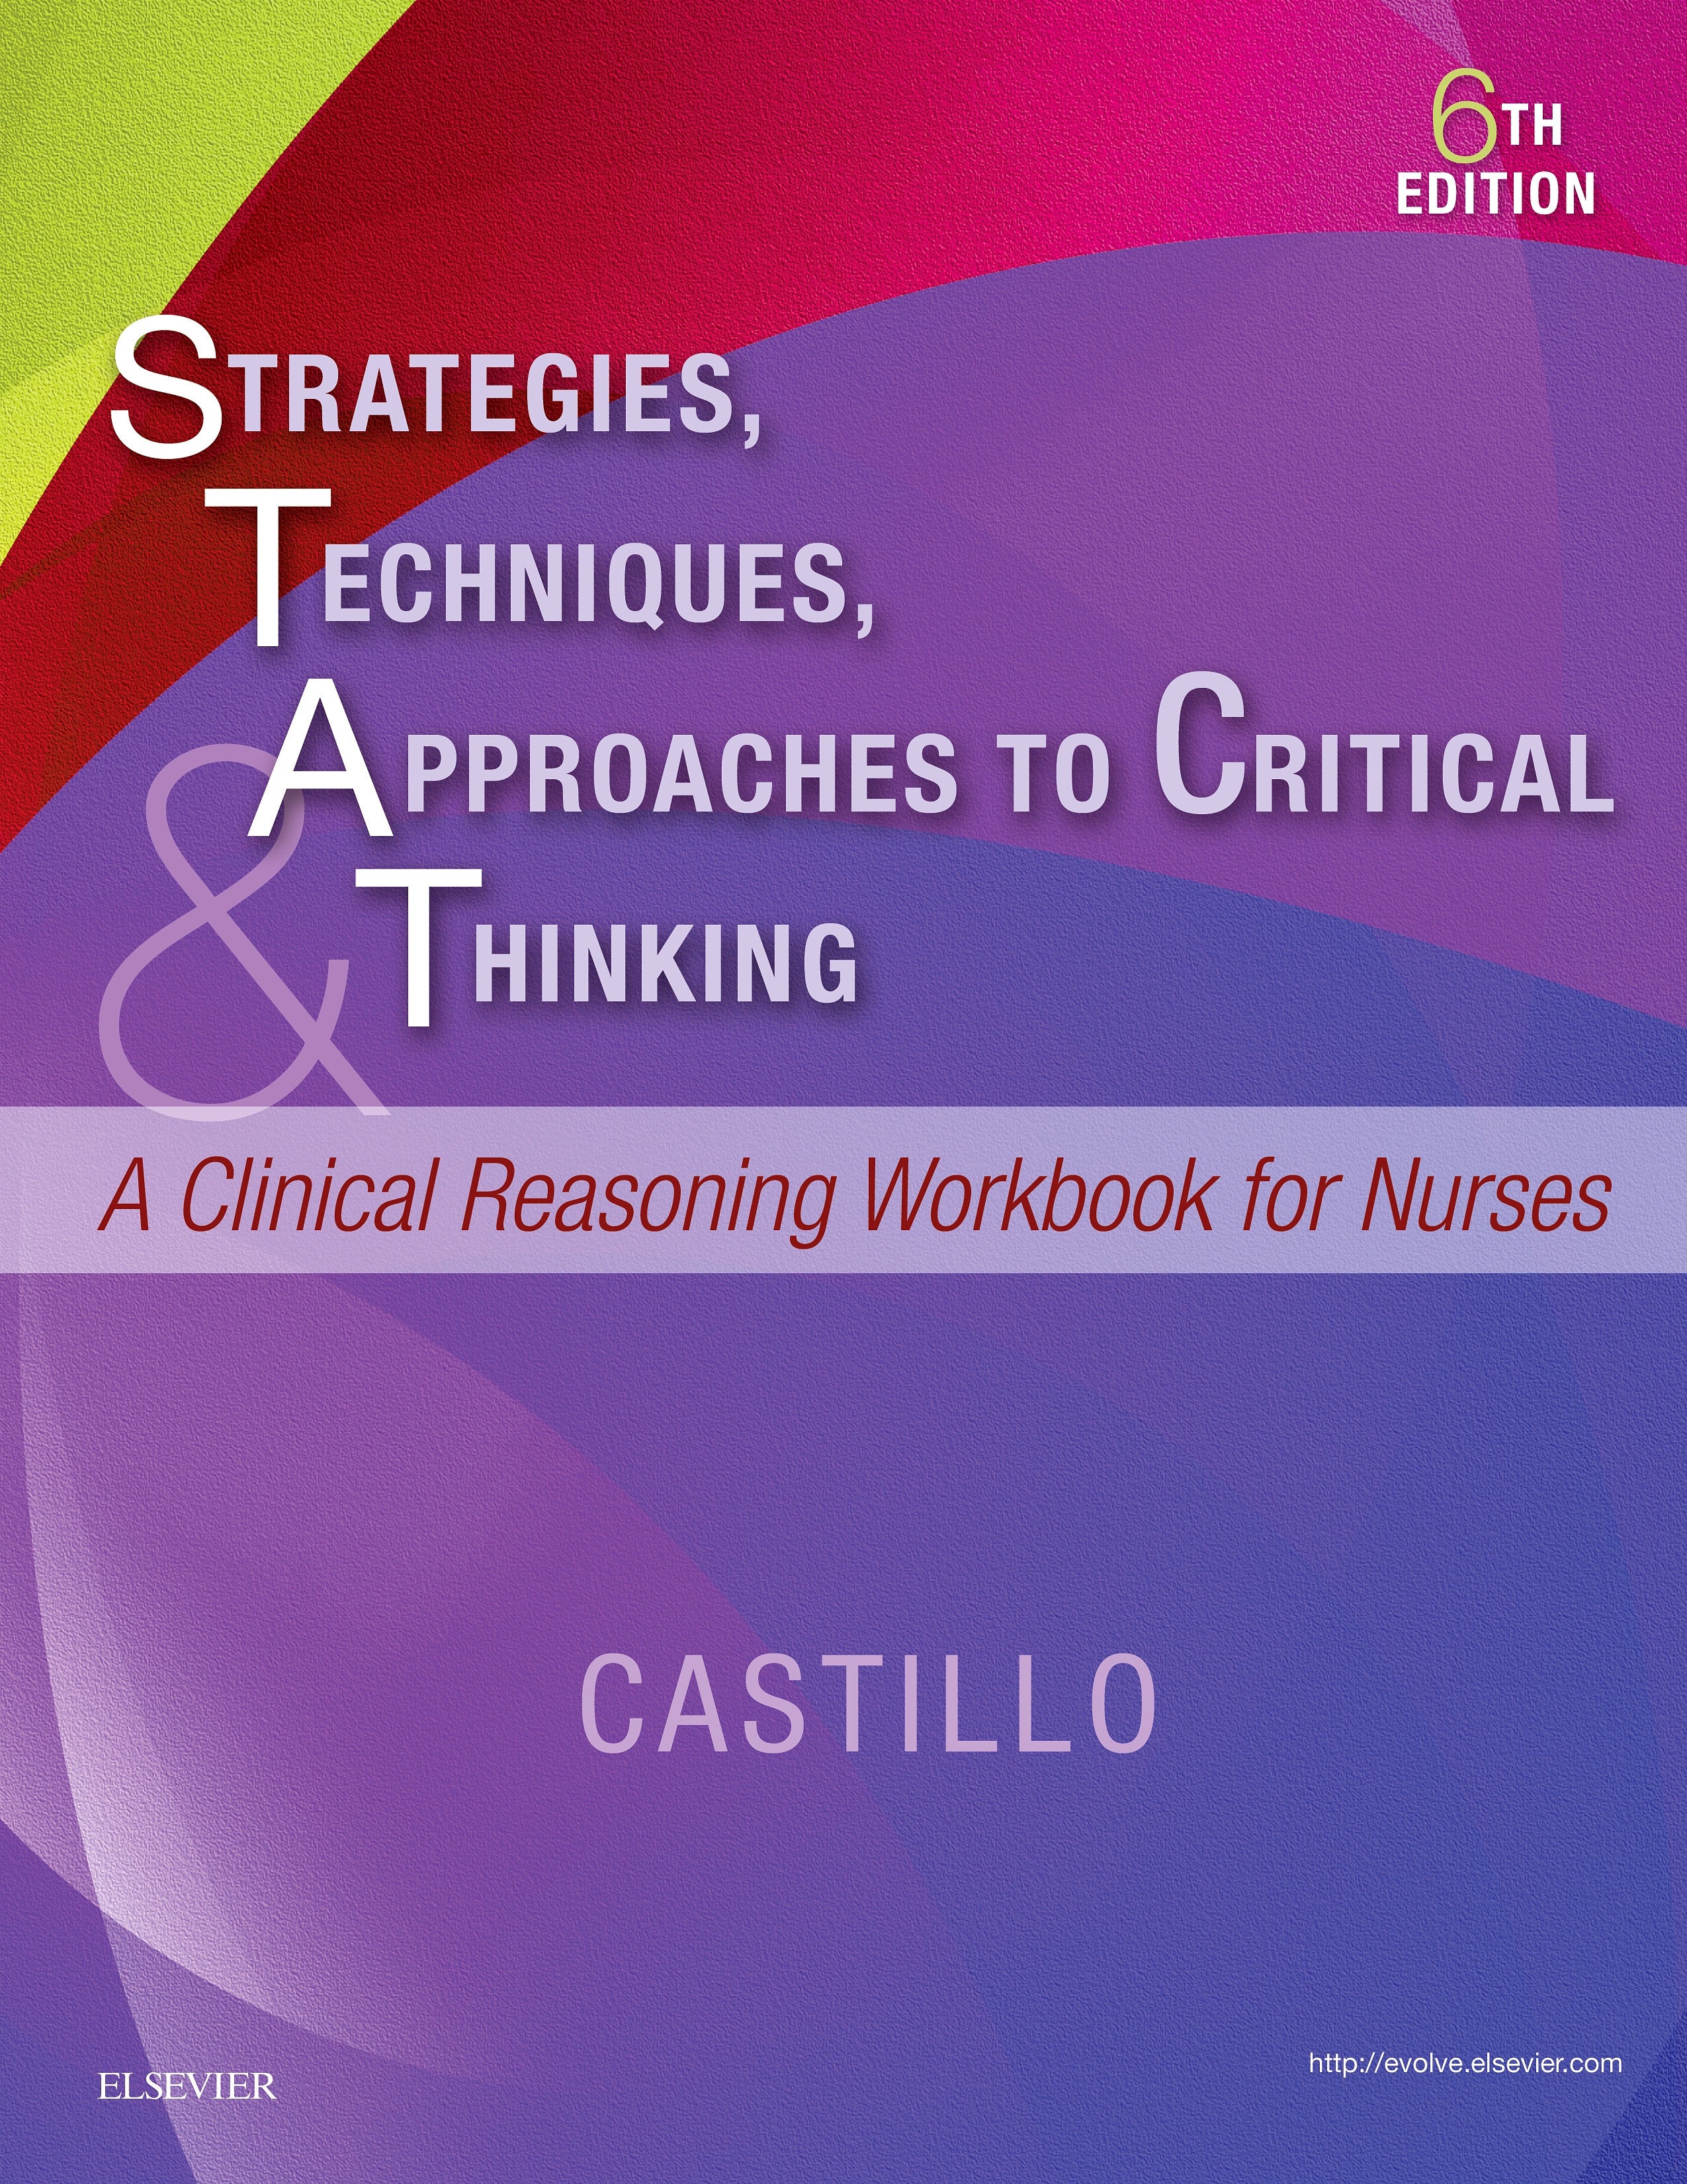 Evolve Resources for Strategies, Techniques, & Approaches to Critical Thinking, 6th Edition